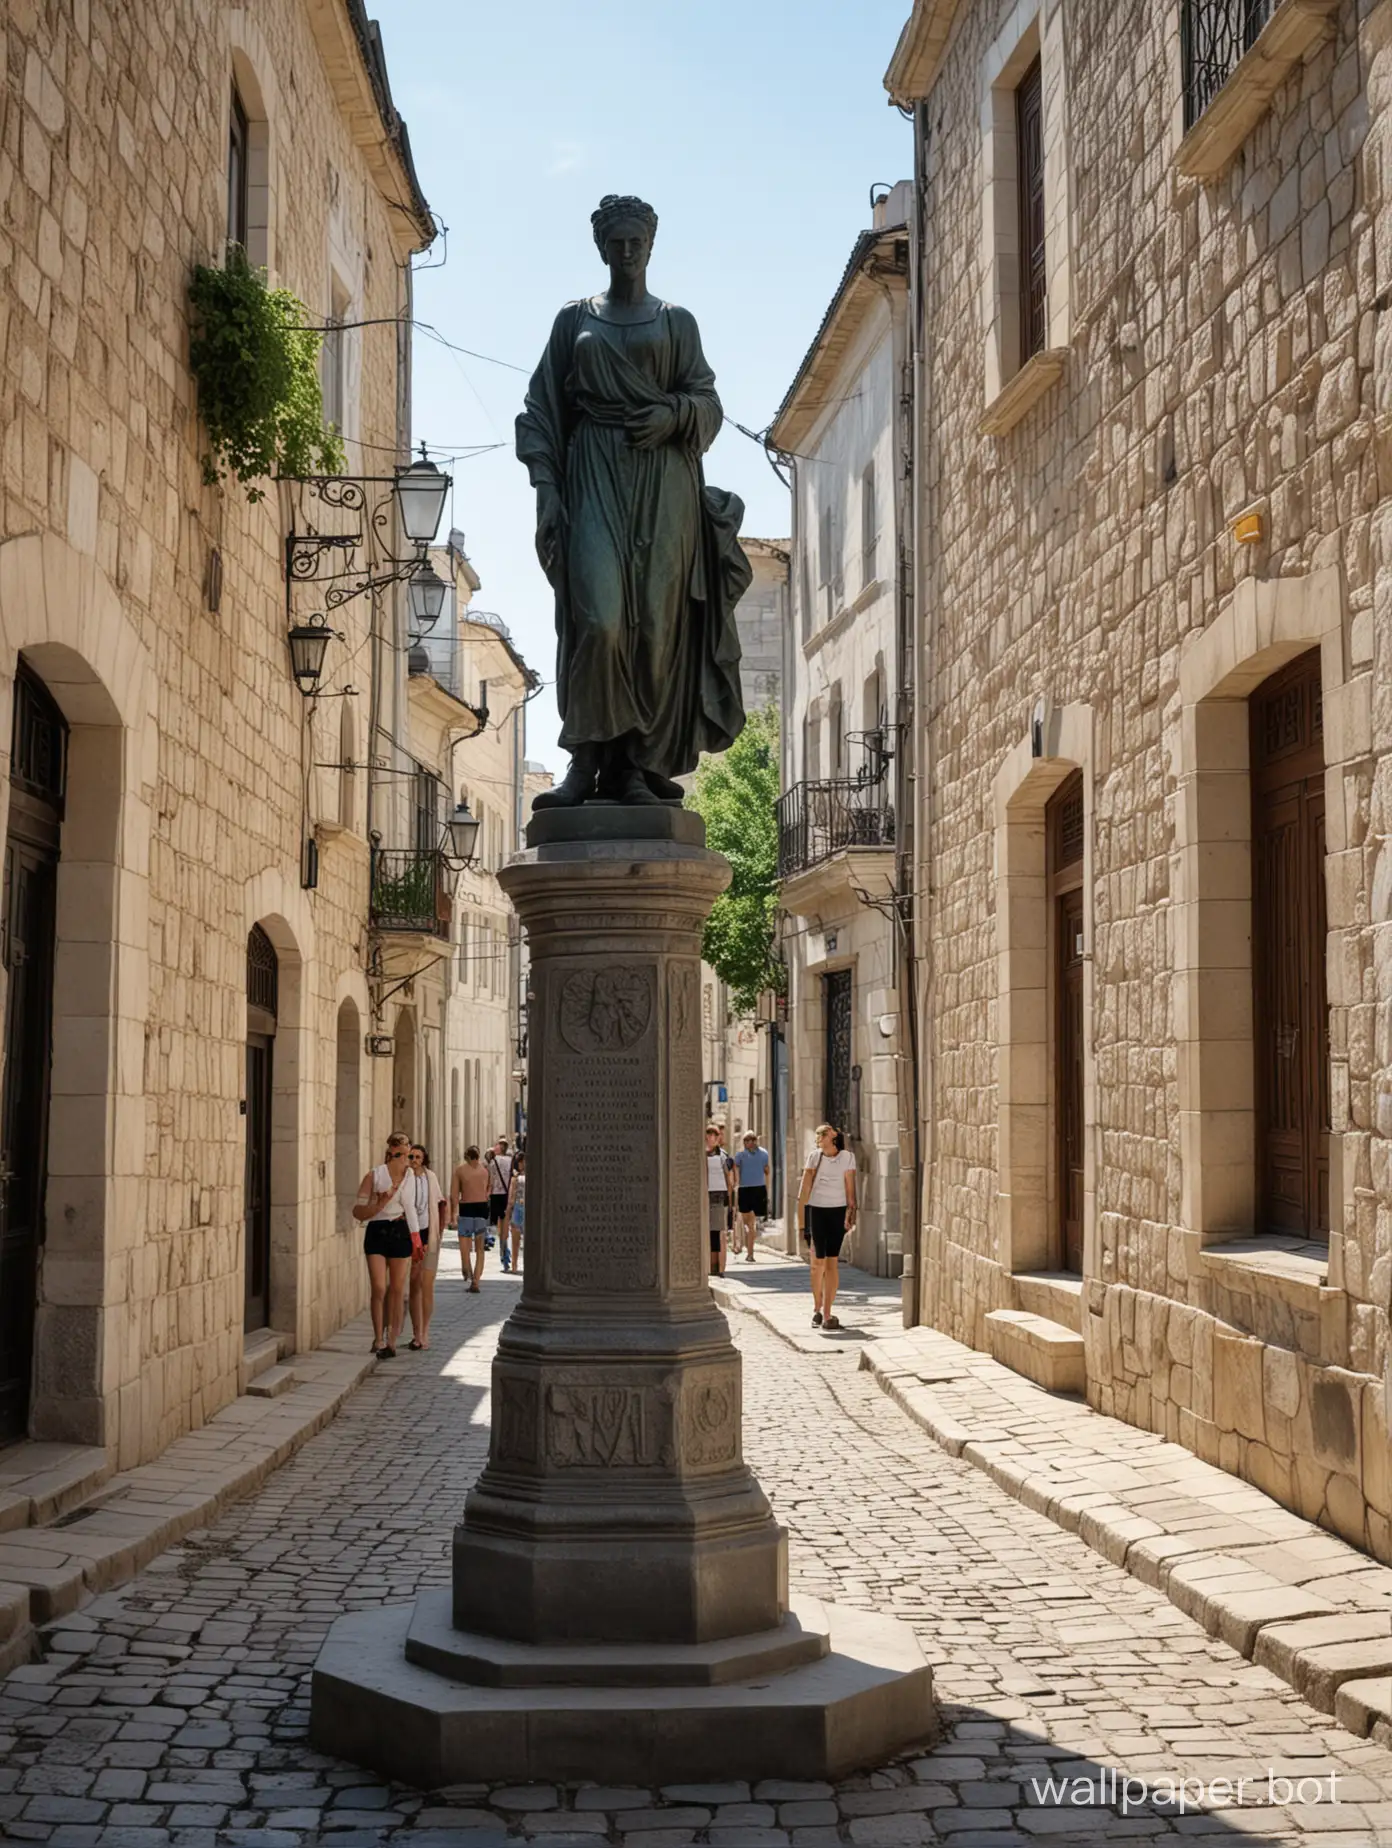 Summer-Scene-in-Crimea-Old-Town-Street-with-Monument-and-Locals